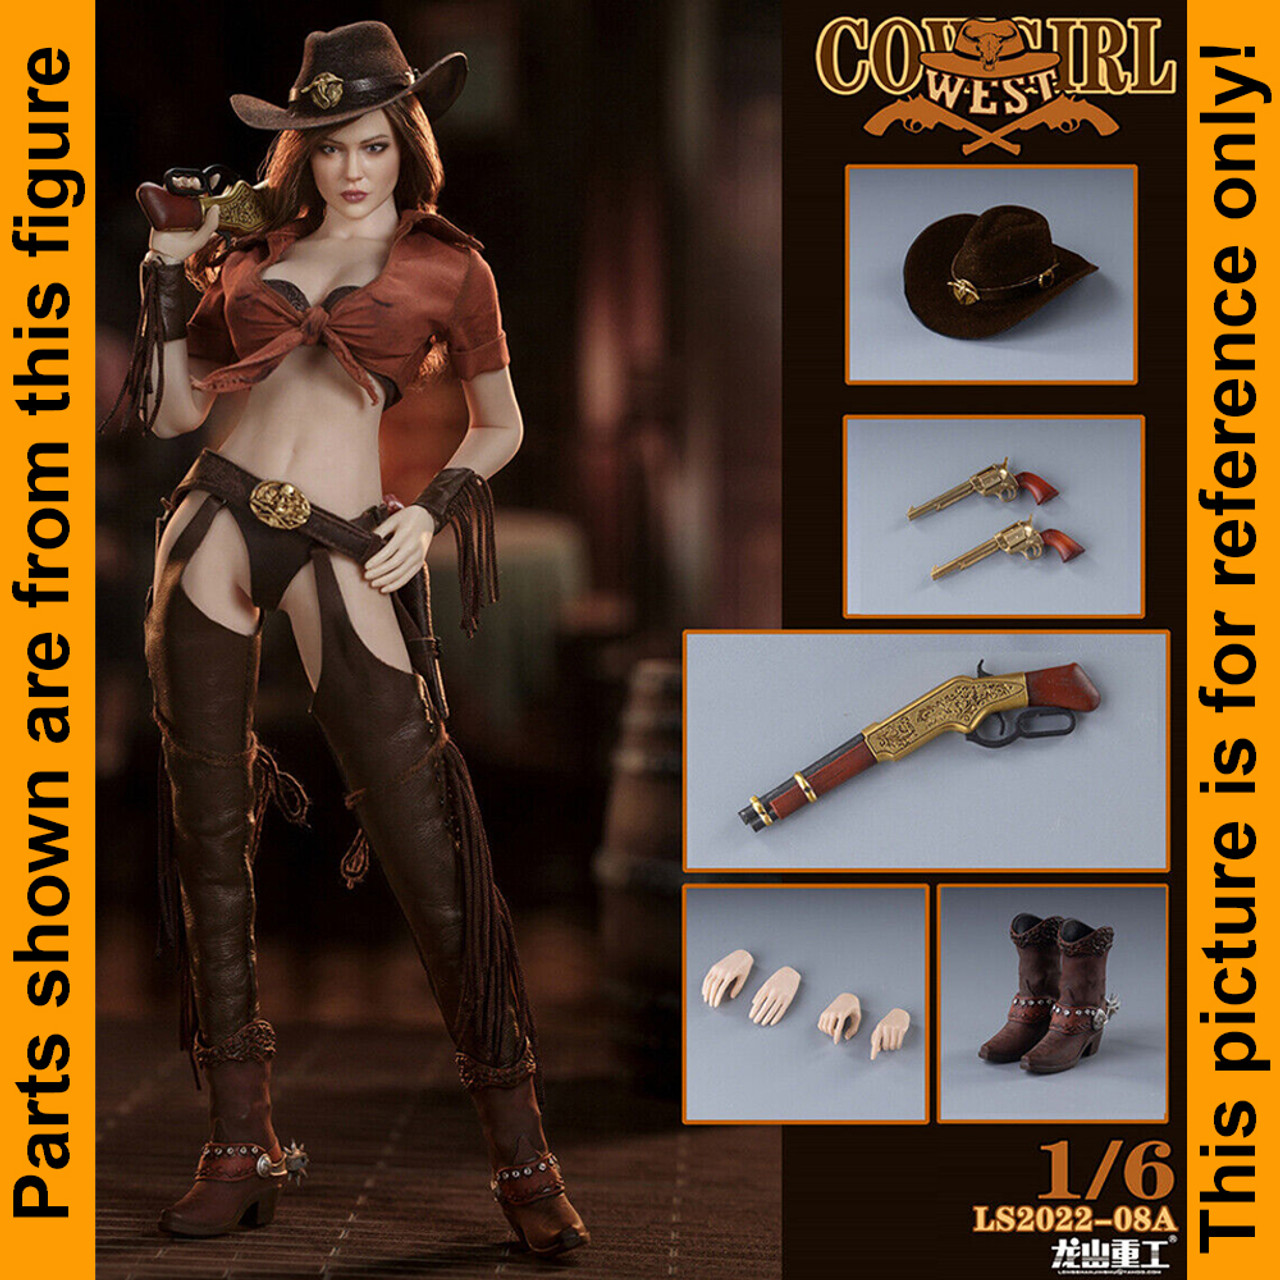 Western Cowgirl A - Brown Leather Gauntlets - 1/6 Scale -